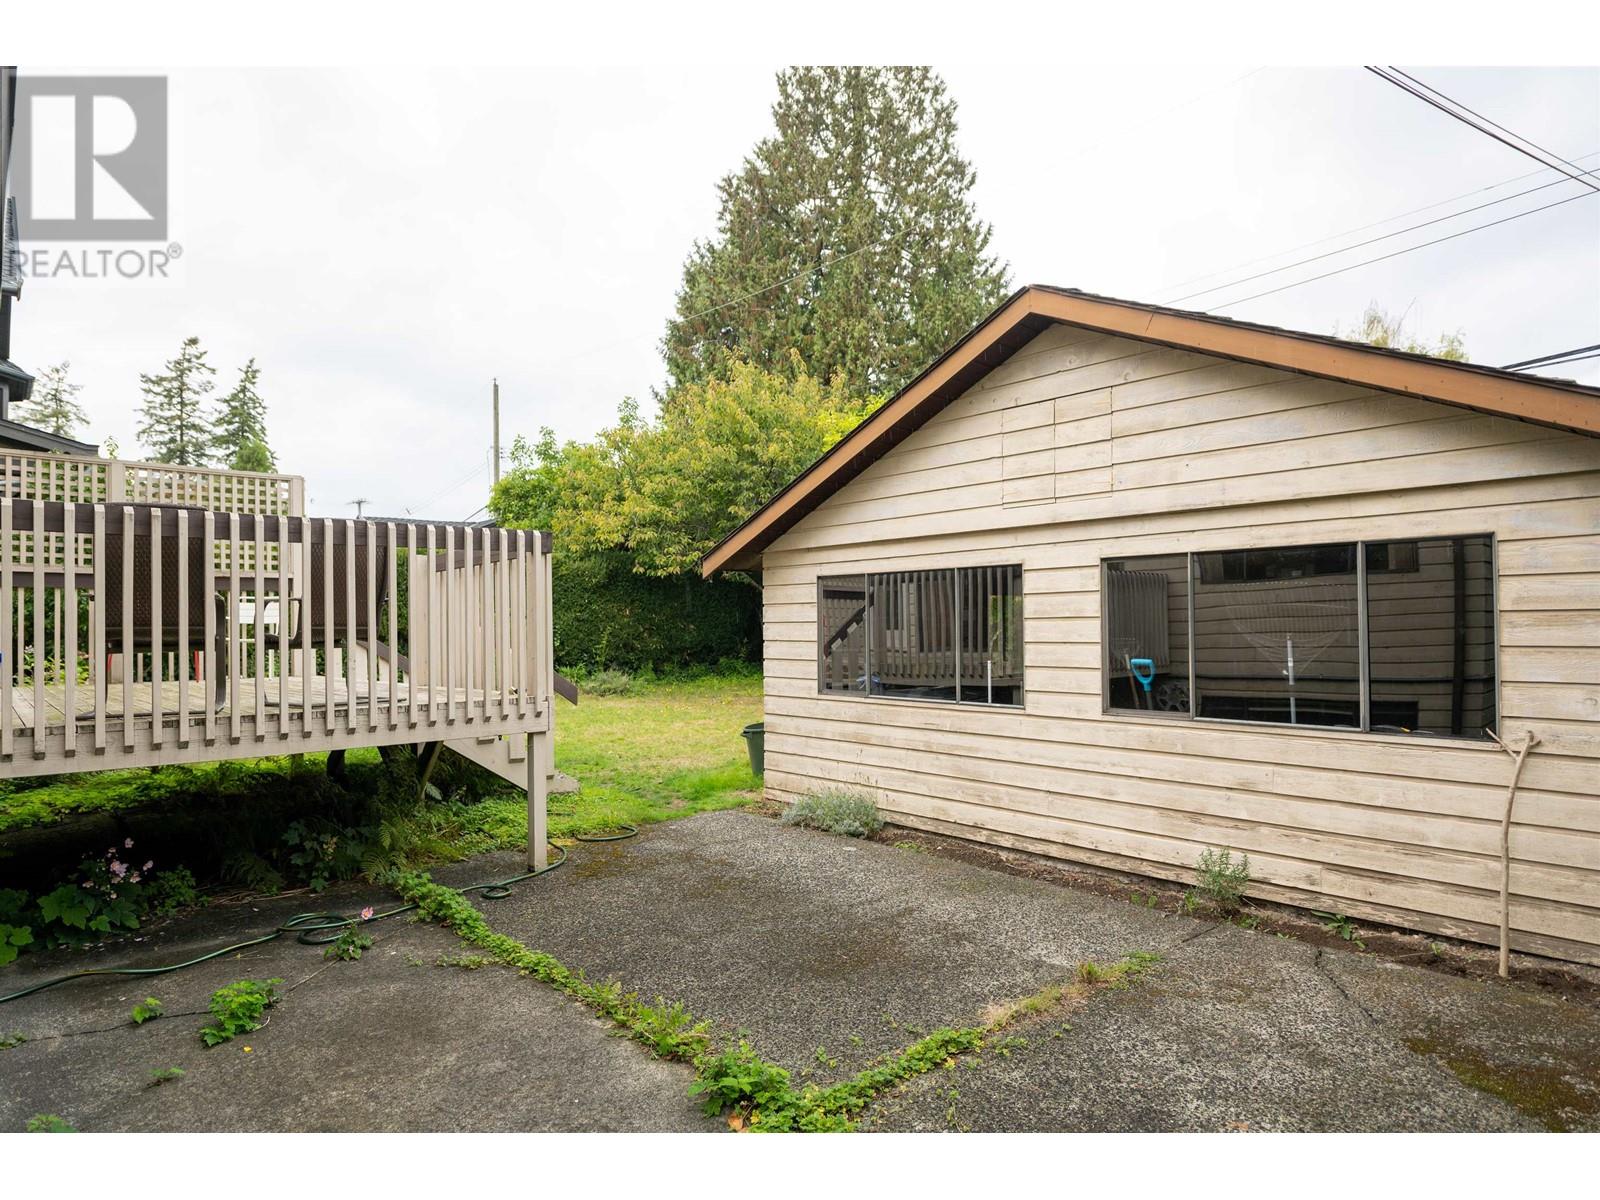 Listing Picture 27 of 29 : 1249 W 39TH AVENUE, Vancouver / 溫哥華 - 魯藝地產 Yvonne Lu Group - MLS Medallion Club Member